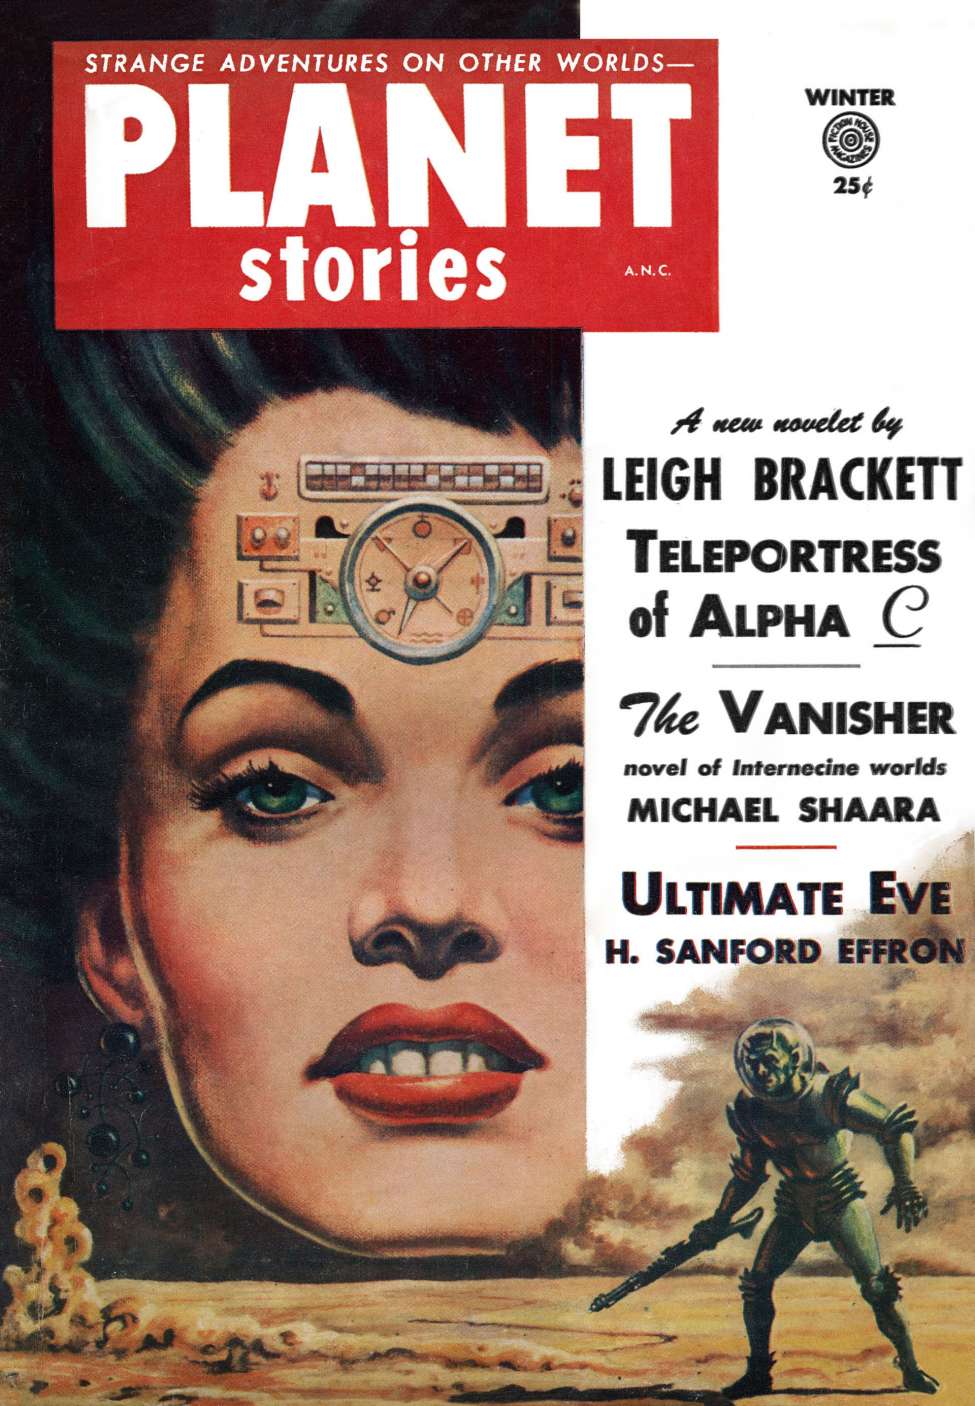 Book Cover For Planet Stories v6 9 - Teleportress of Alpha C - Leigh Brackett